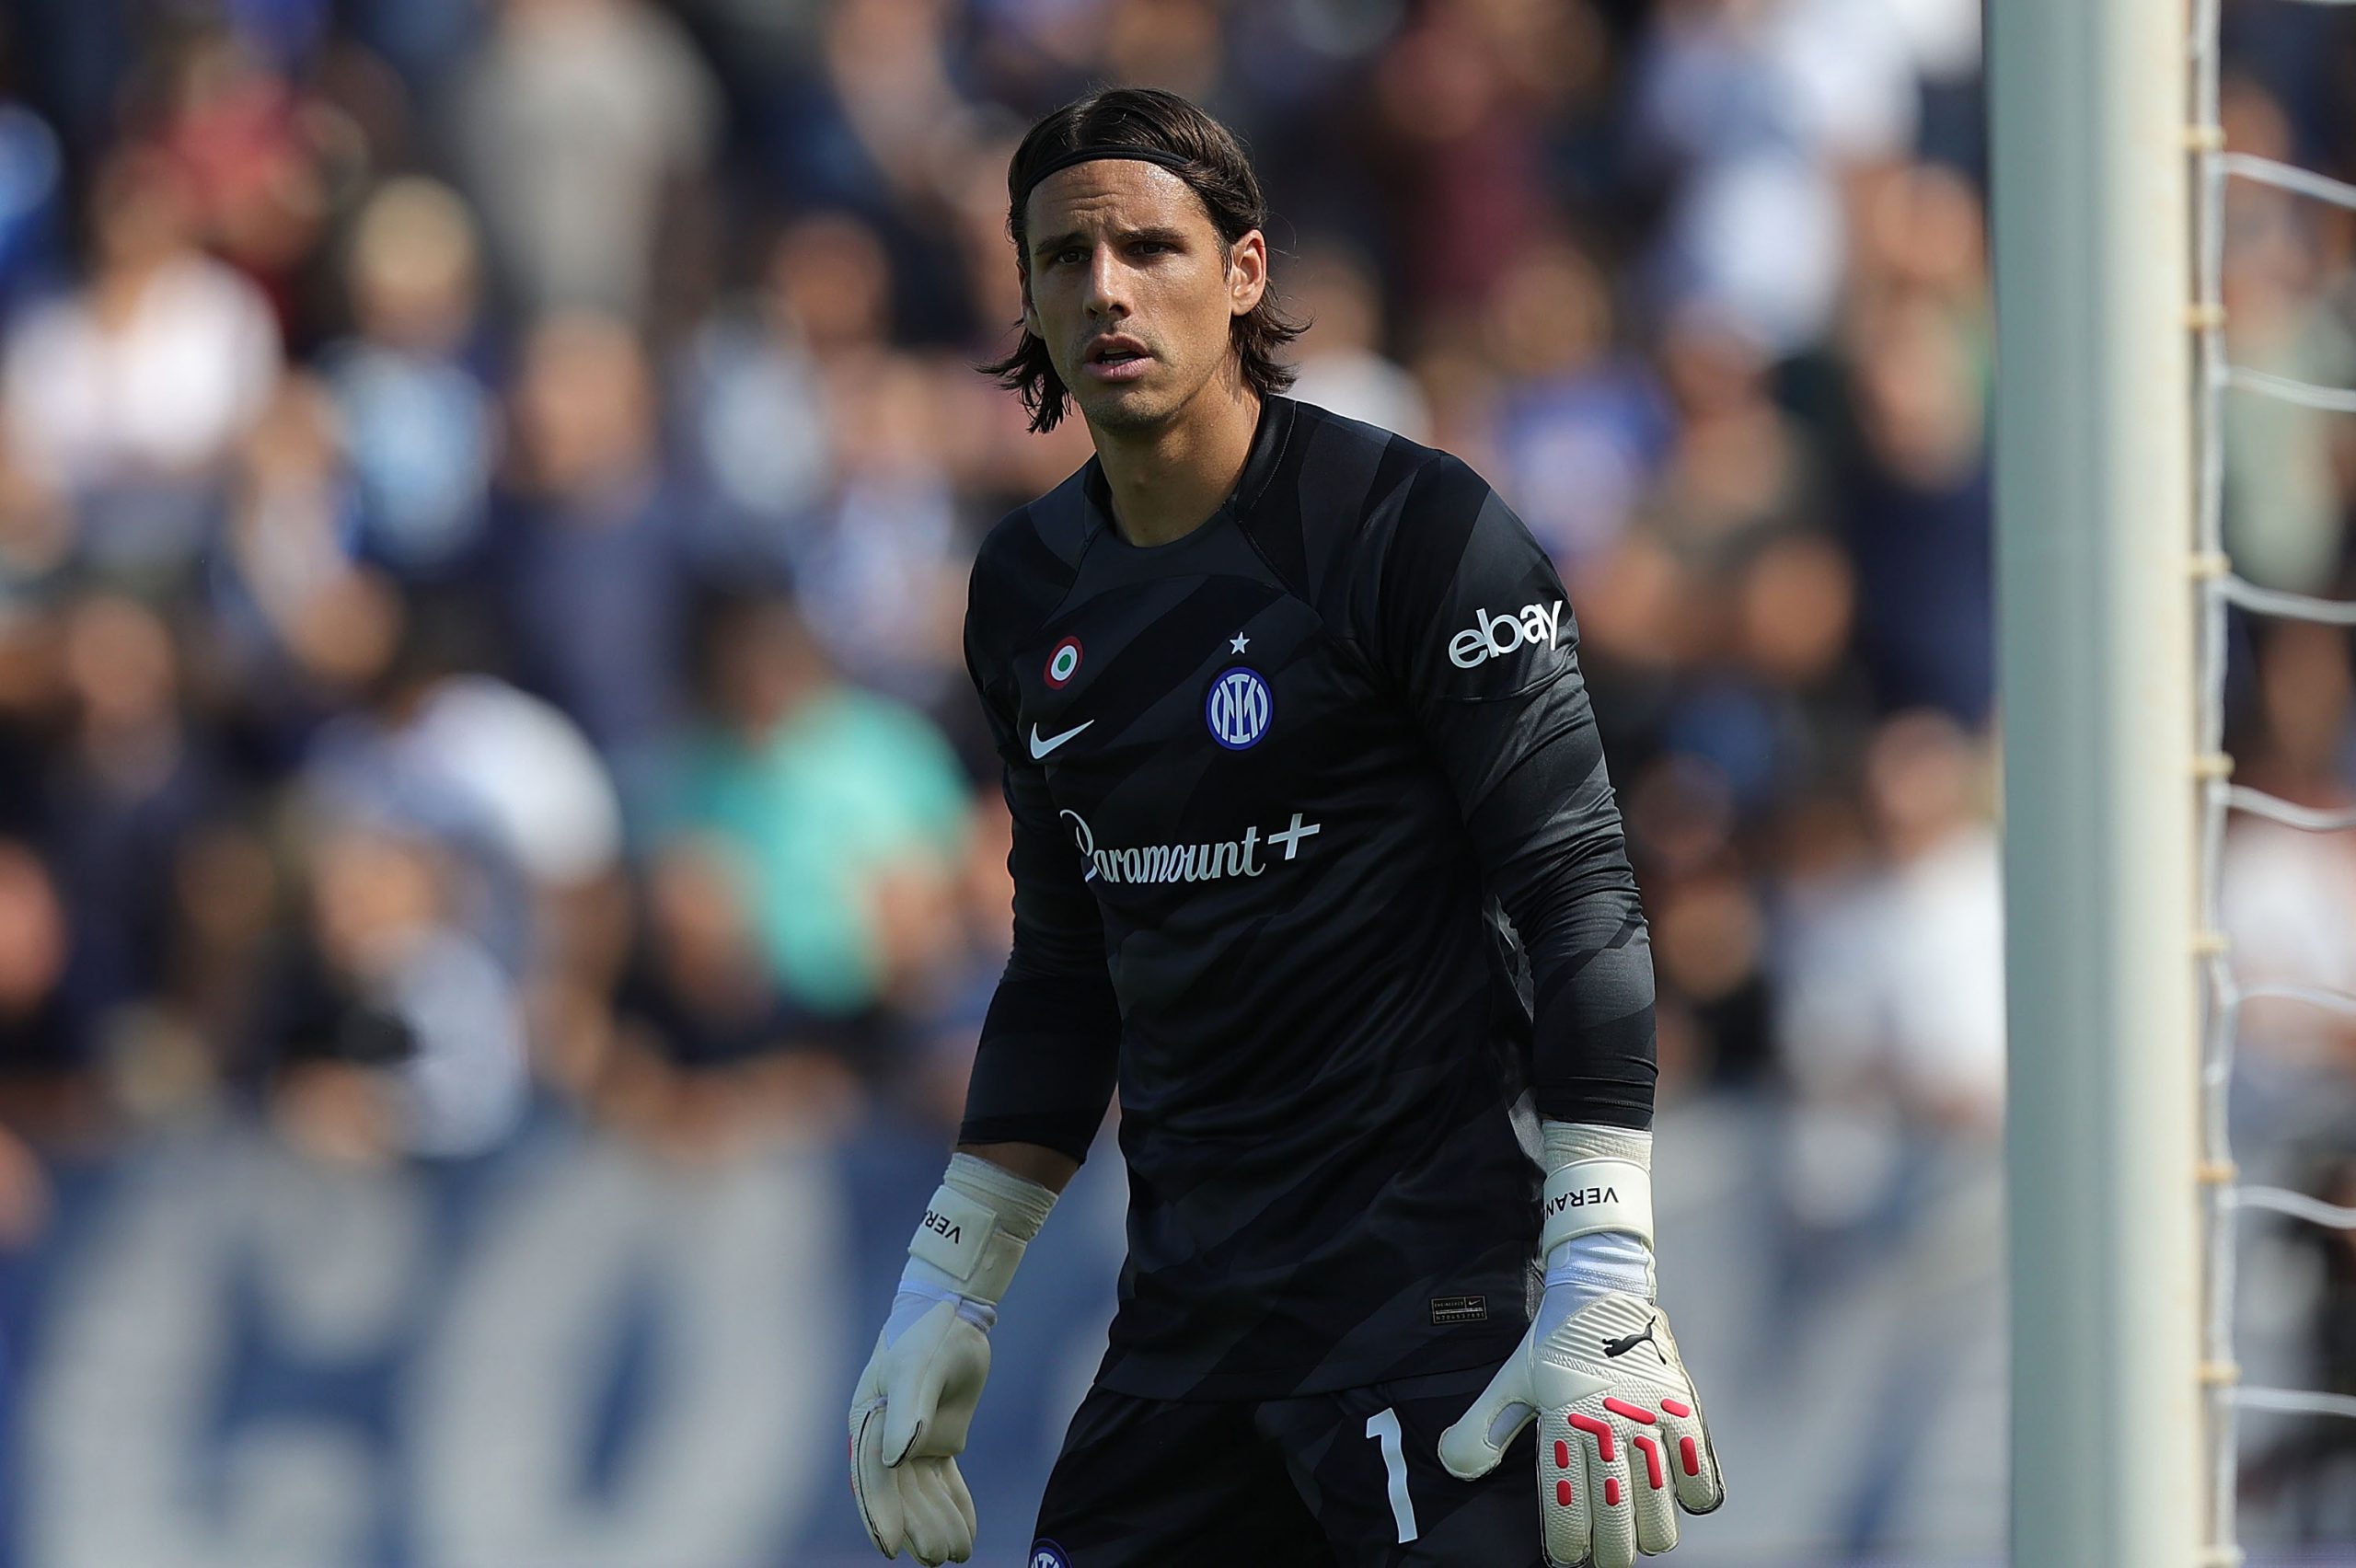 Yann Sommer in Empoli-Inter di Serie A (Photo by Gabriele Maltinti/Getty Images via OneFootball)